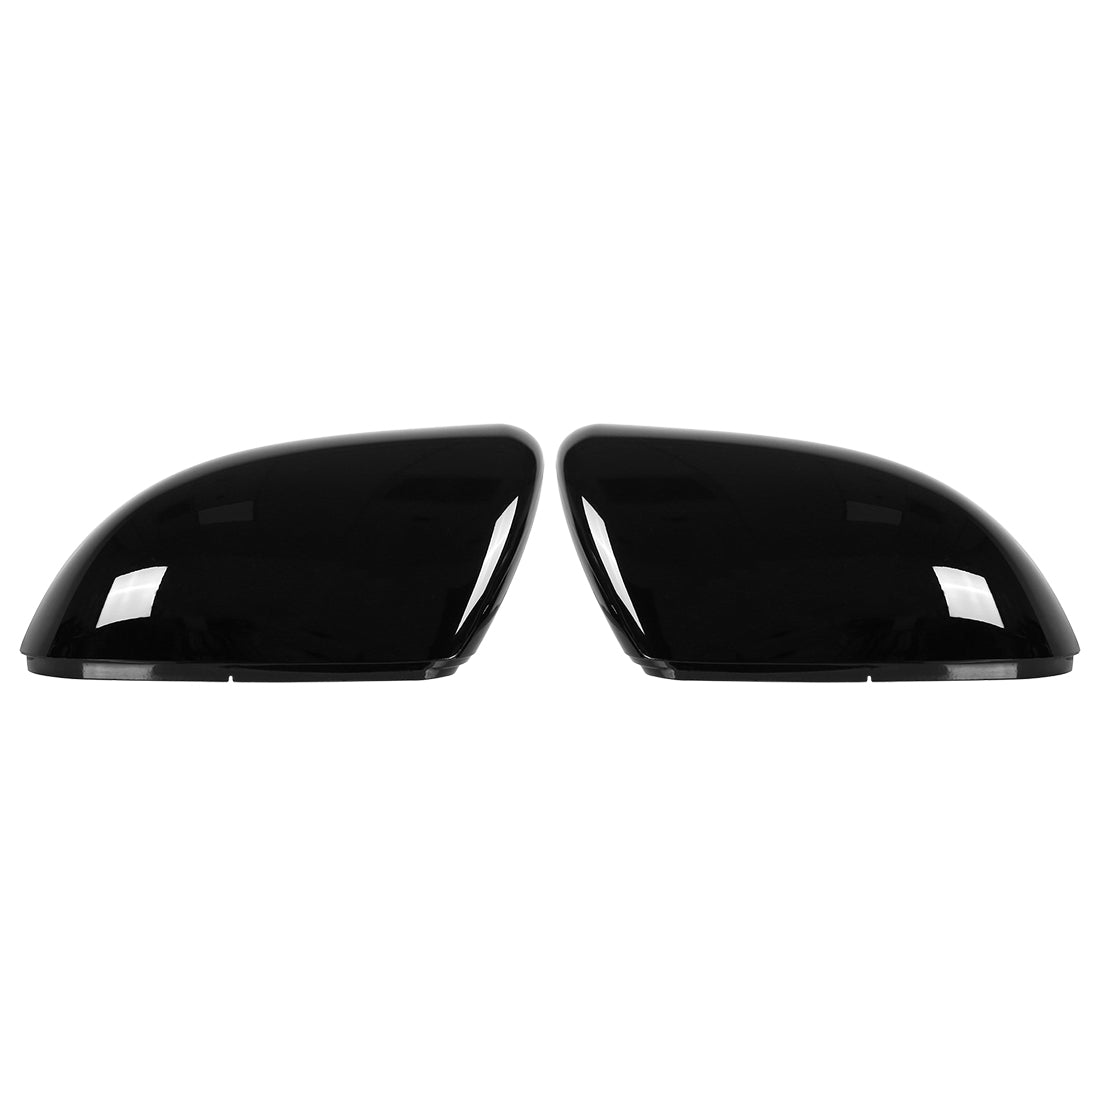 X AUTOHAUX Pair New Exterior Rear View Mirror Housing Door Wing Mirror Covering Cap Glossy Black for Volkswagen Golf 6 2009-2012